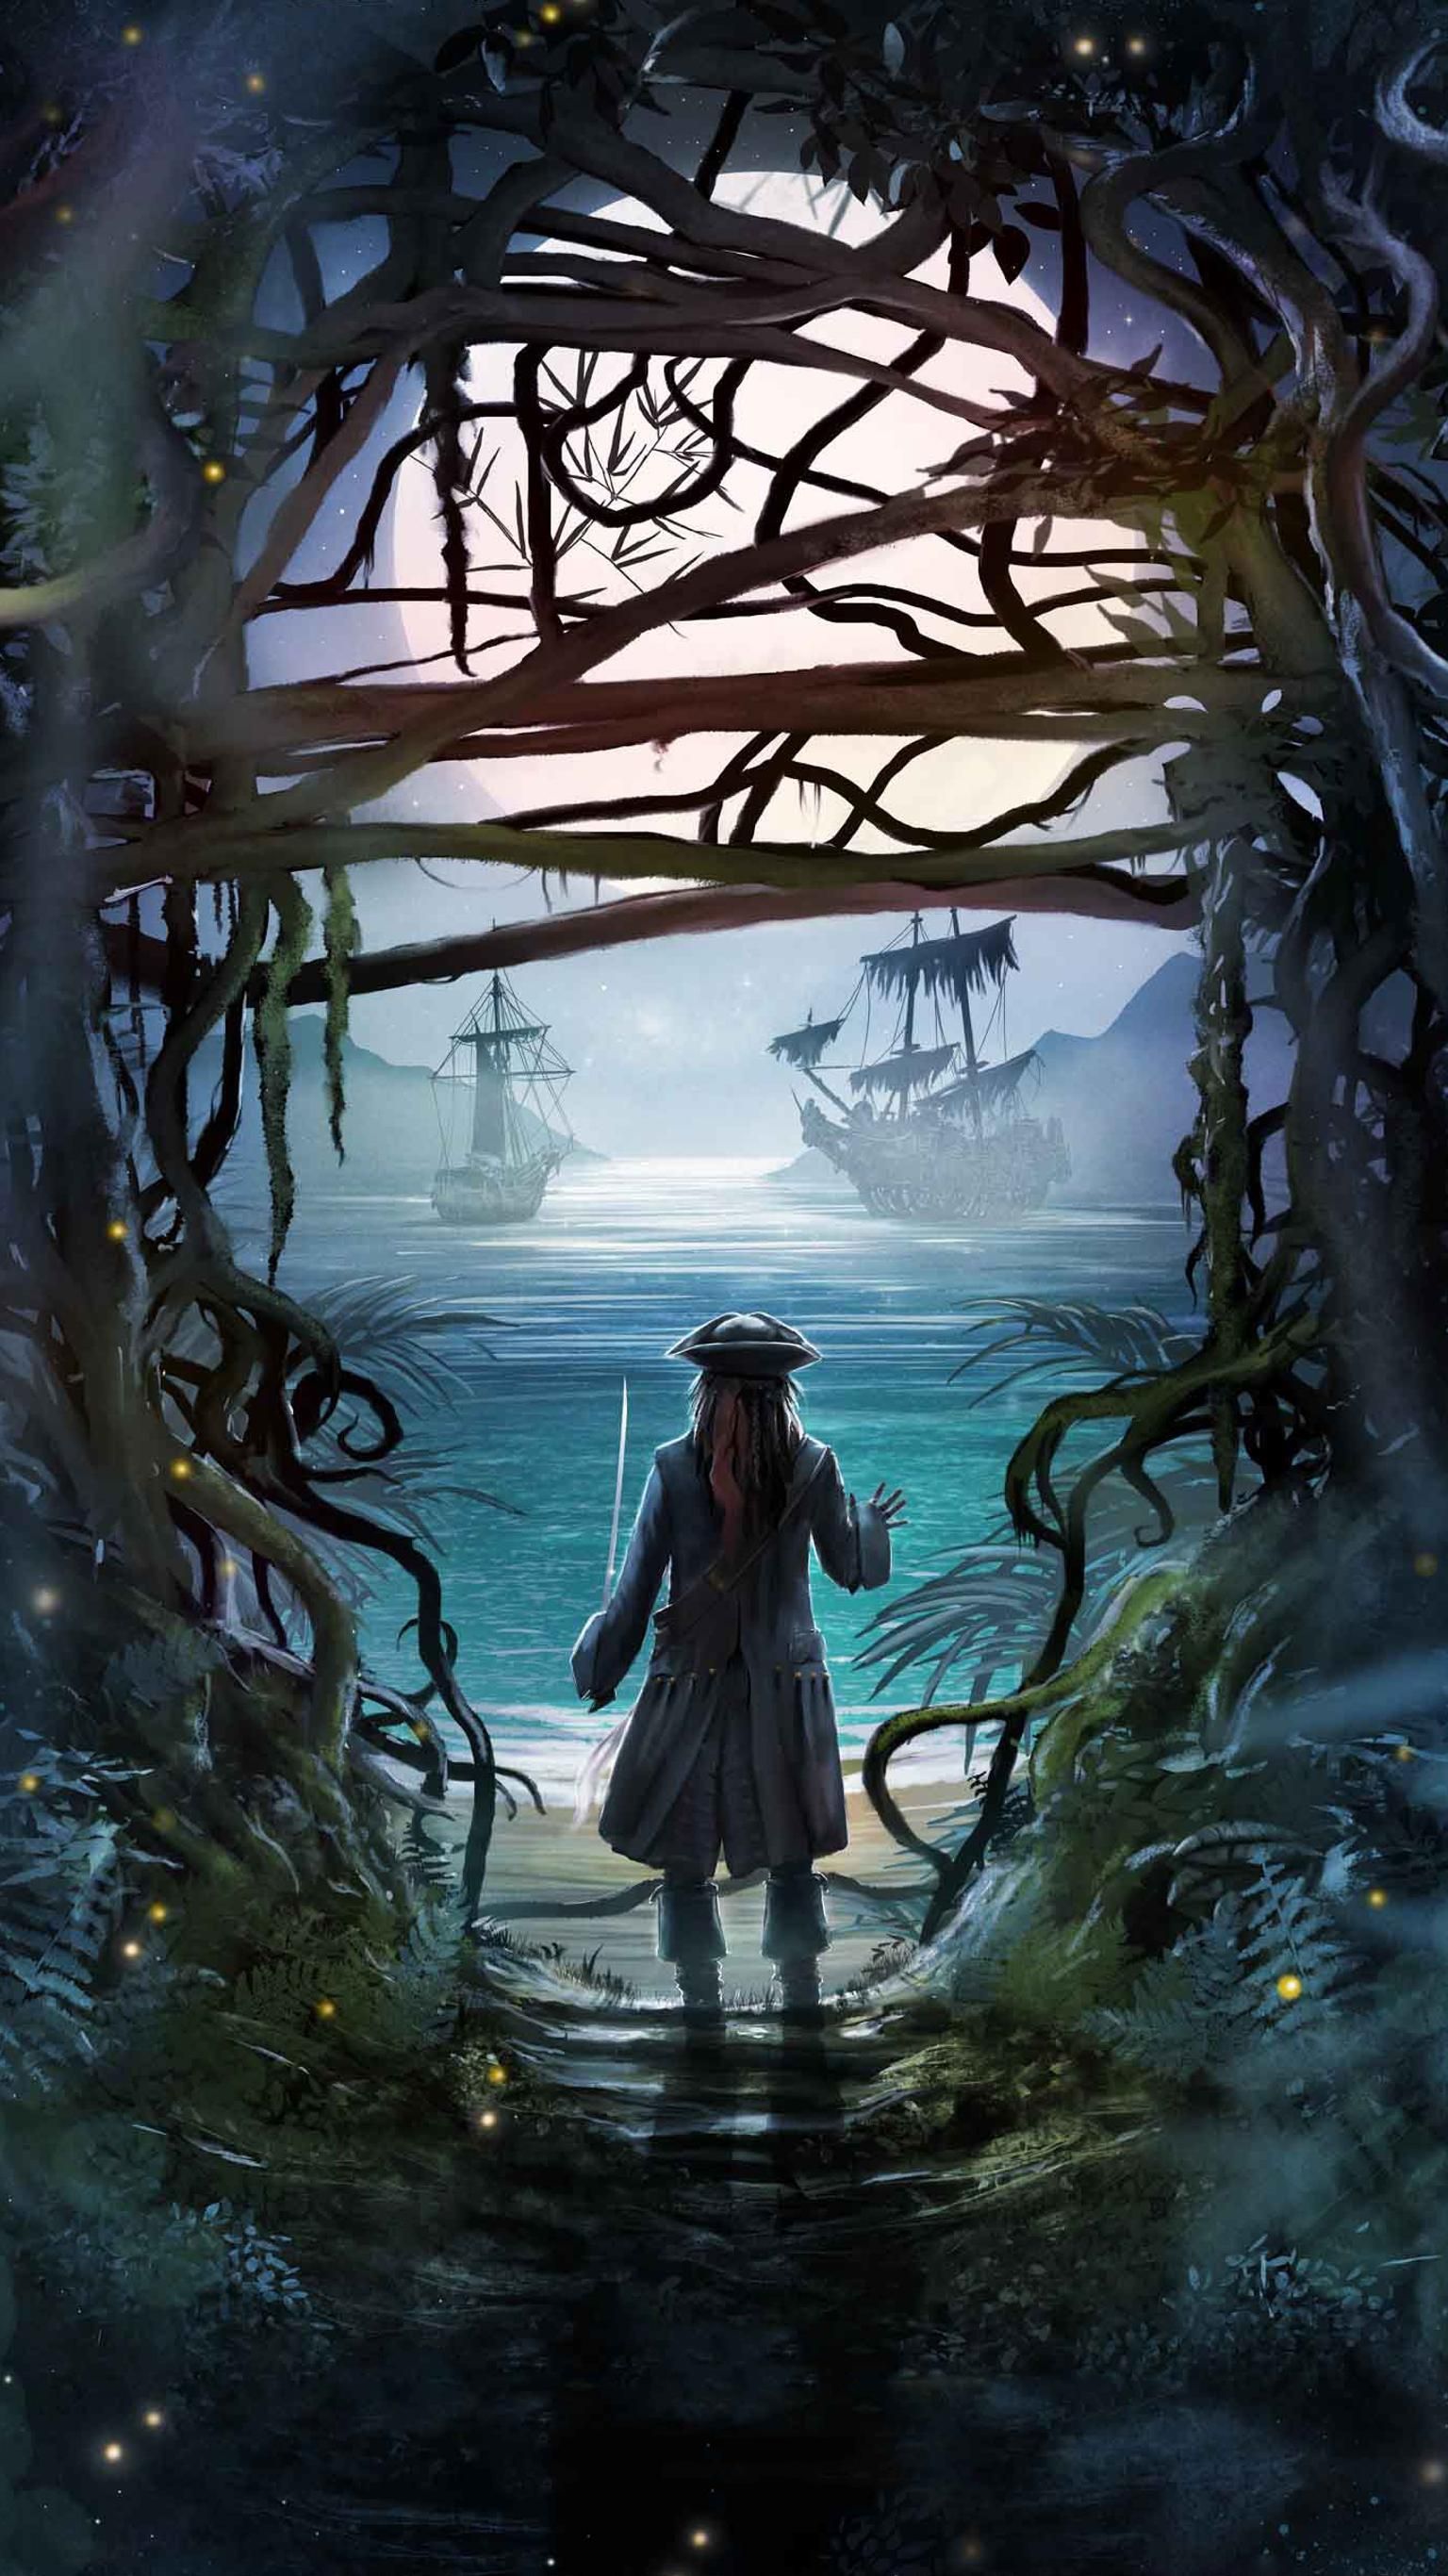 Pirates of the Caribbean: Dead Men Tell No Tales (2017) Phone Wallpaper. Moviemania. Pirates of the caribbean, Jack sparrow wallpaper, Sea of thieves